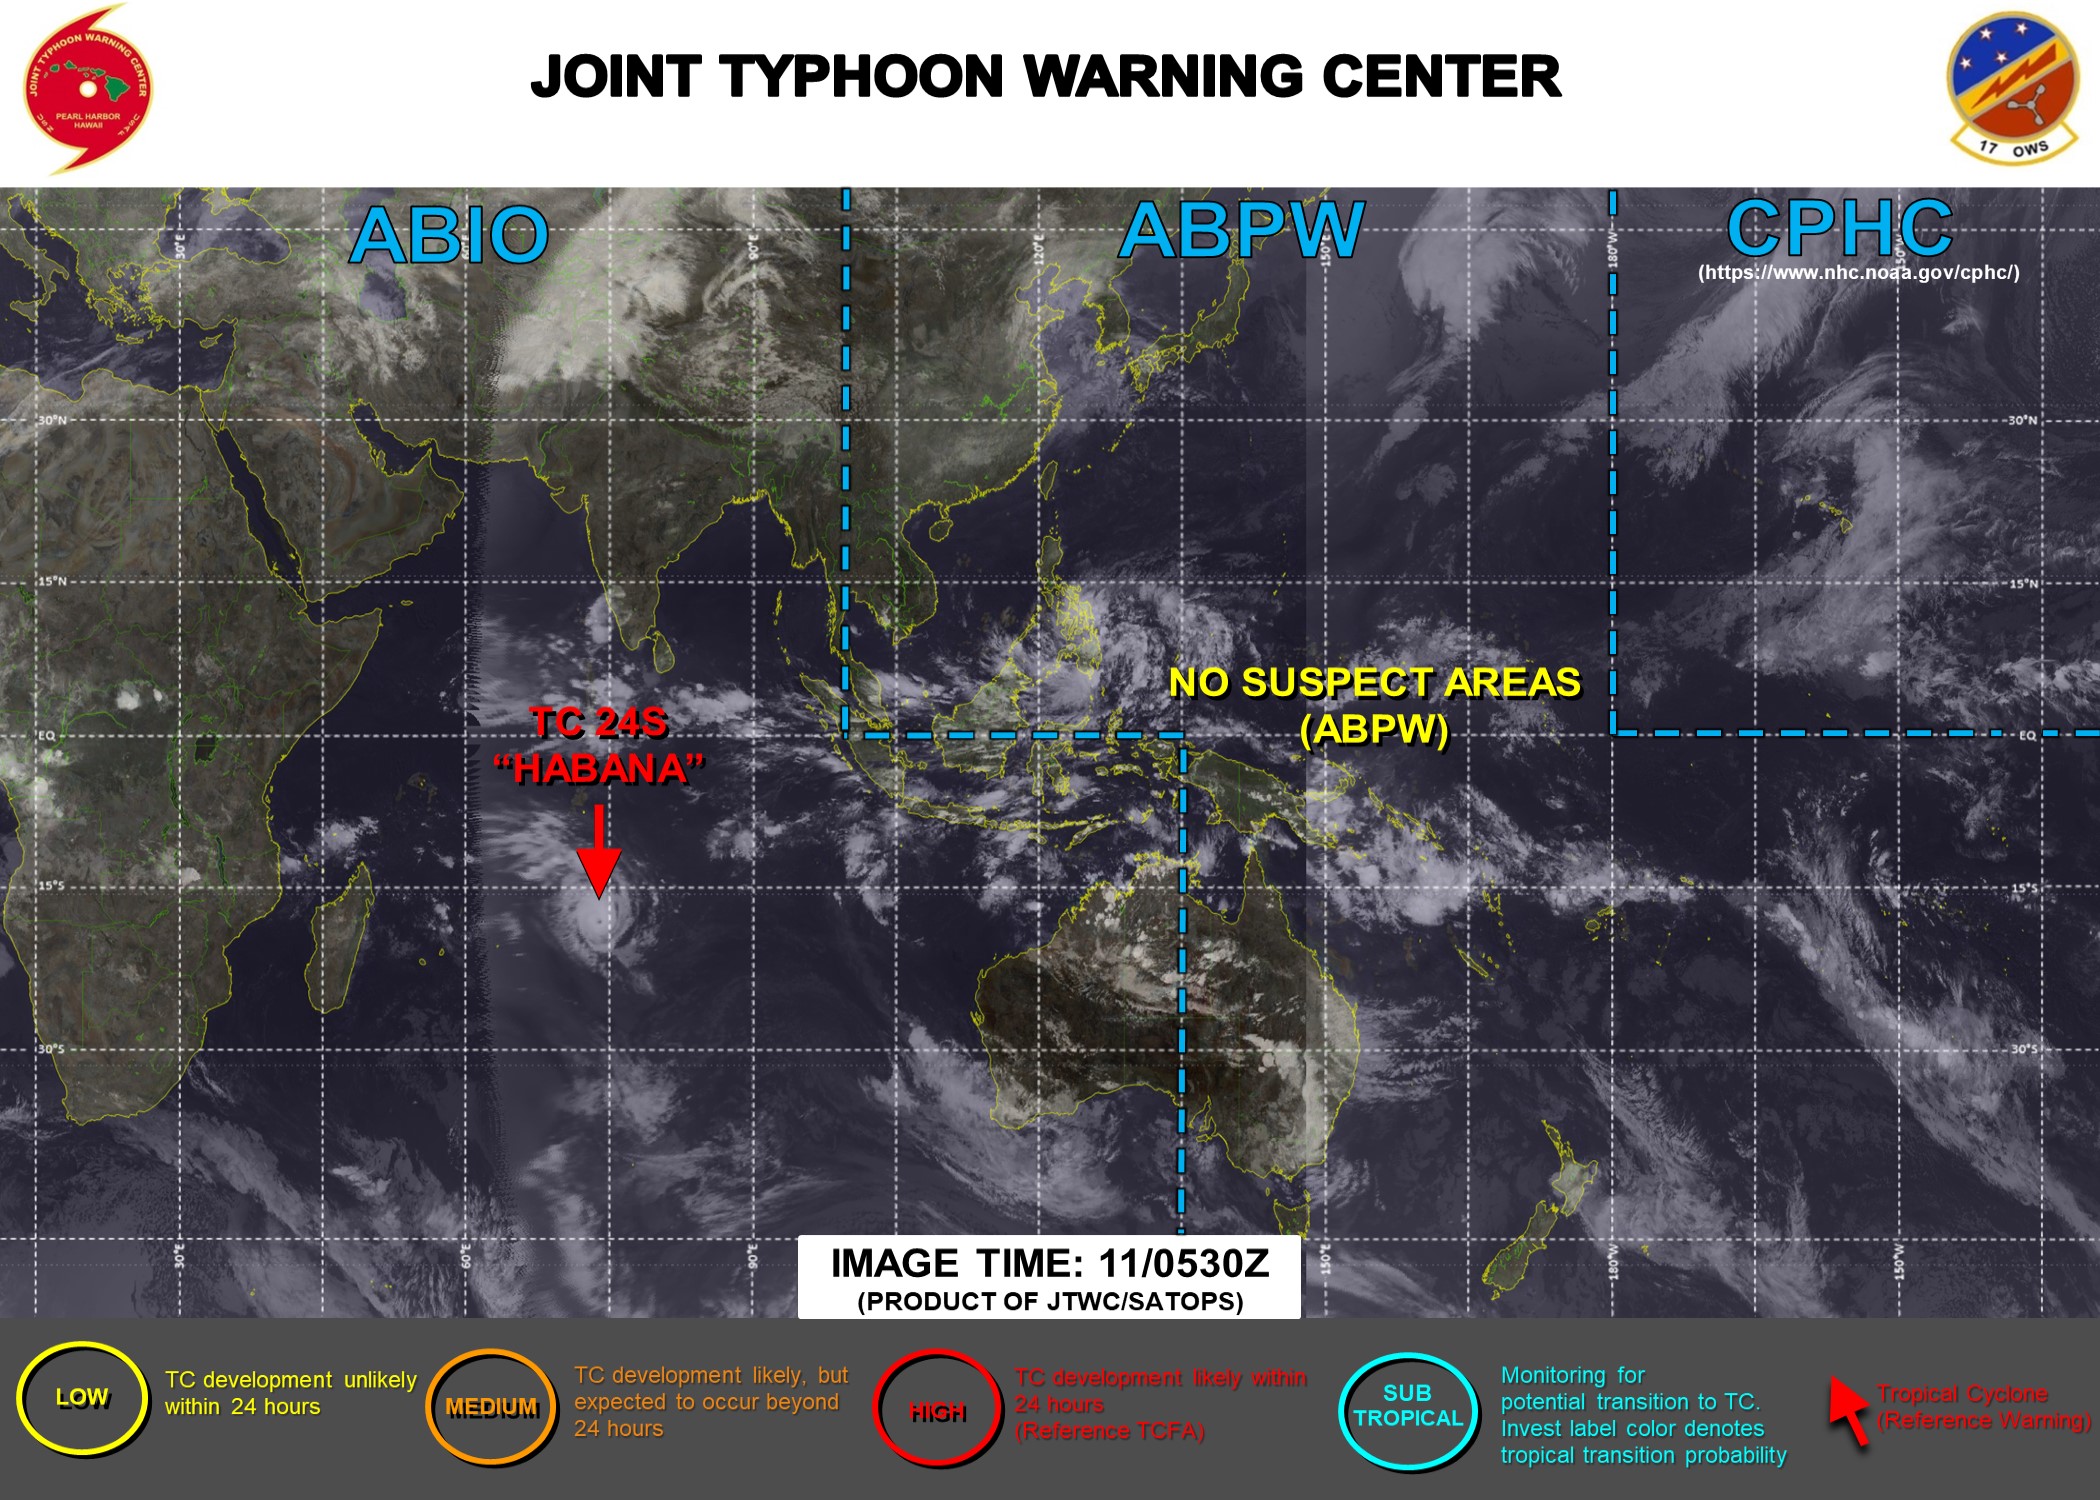 11/09UTC. JTWC HAS BEEN ISSUING 12HOURLY WARNINGS ON 24S(HABANA) ALONG WITH 3HOURLY SATELLITE BULLETINS.